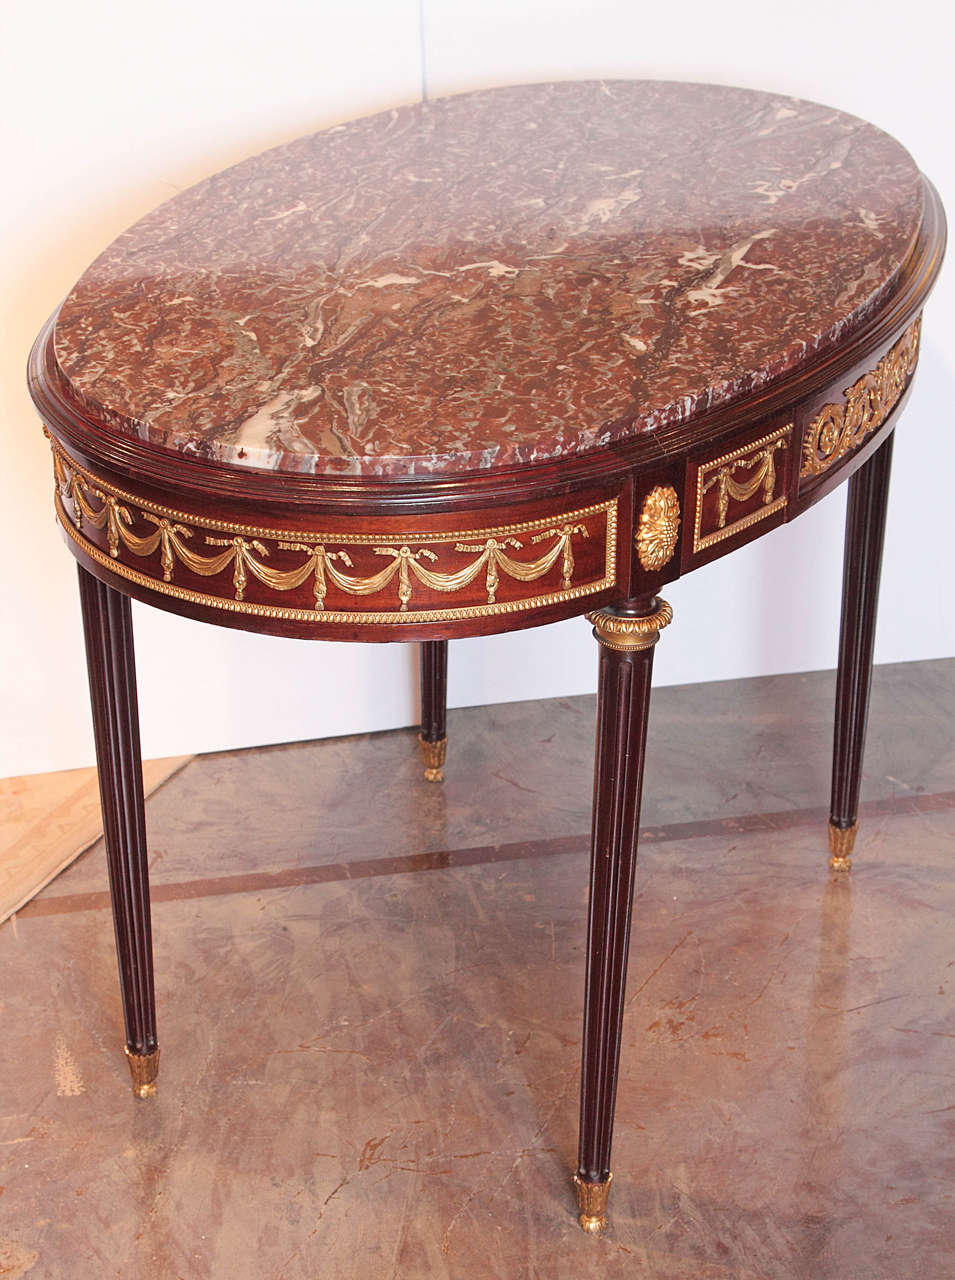 19th century French Louis XVI signed F. Linke marble-topped center table
gilt bronze swag details.